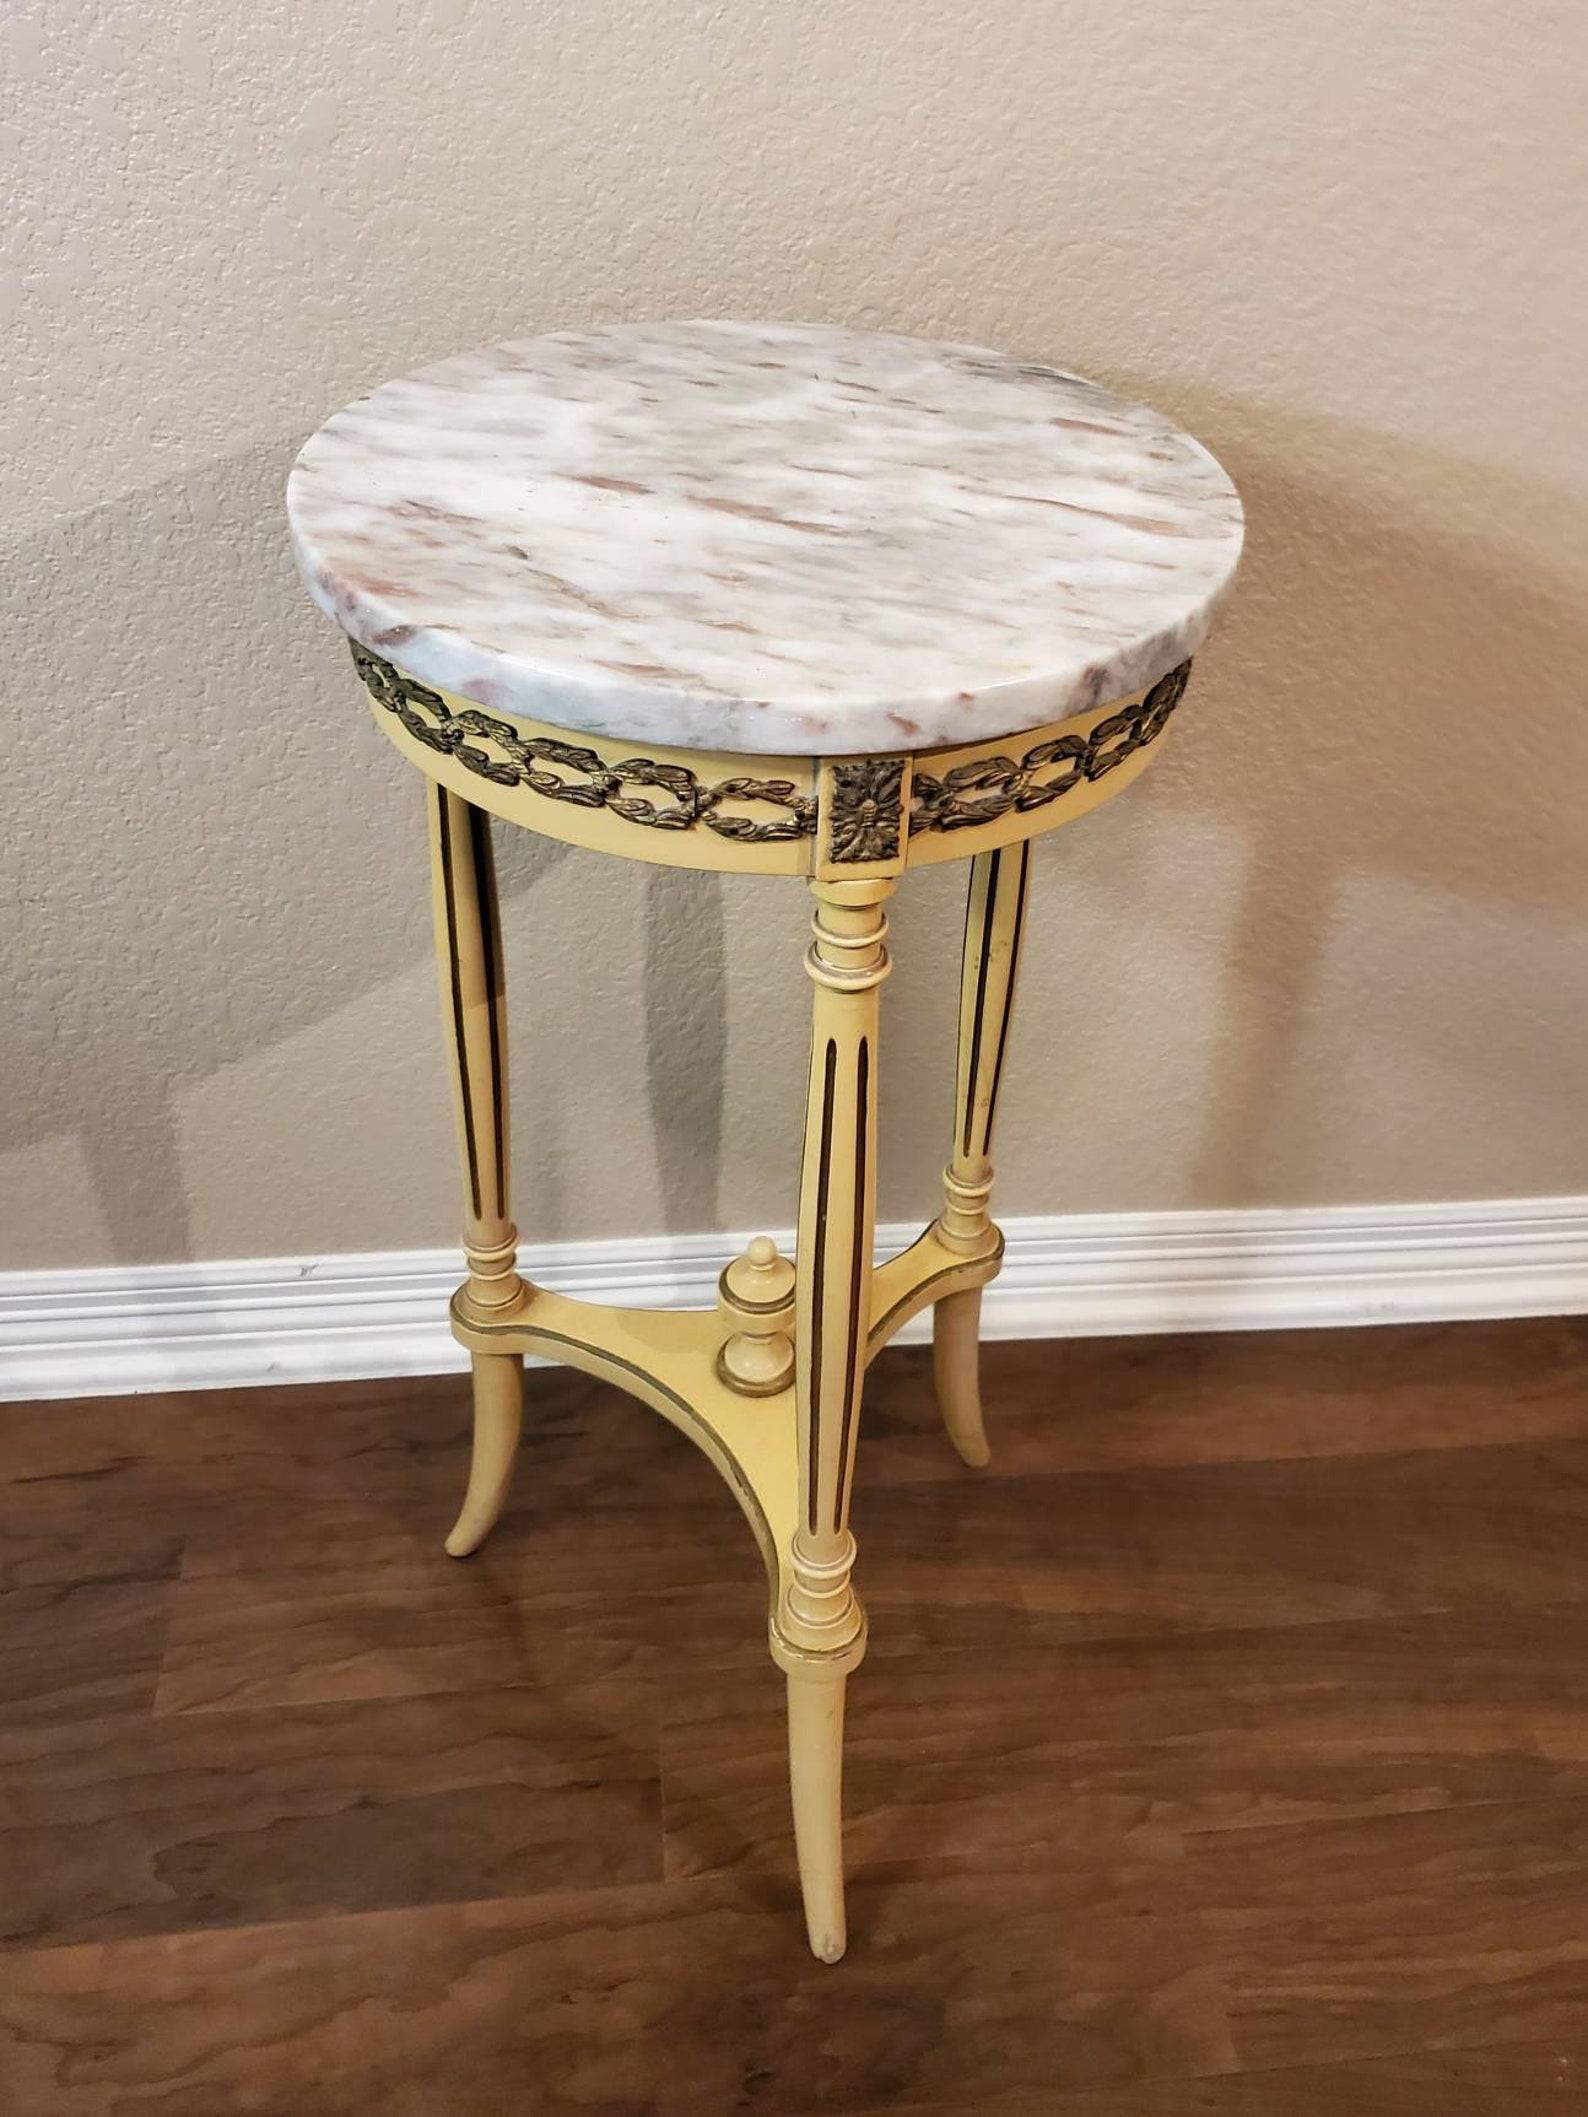 A chic Louis XVI style pedestal table or stand. Hand crafted in France during the first half of the 20th century, it features a circular marble top, above the swag wreath gilt-ormolu mounted hand carved and painted hardwood frame, joined by